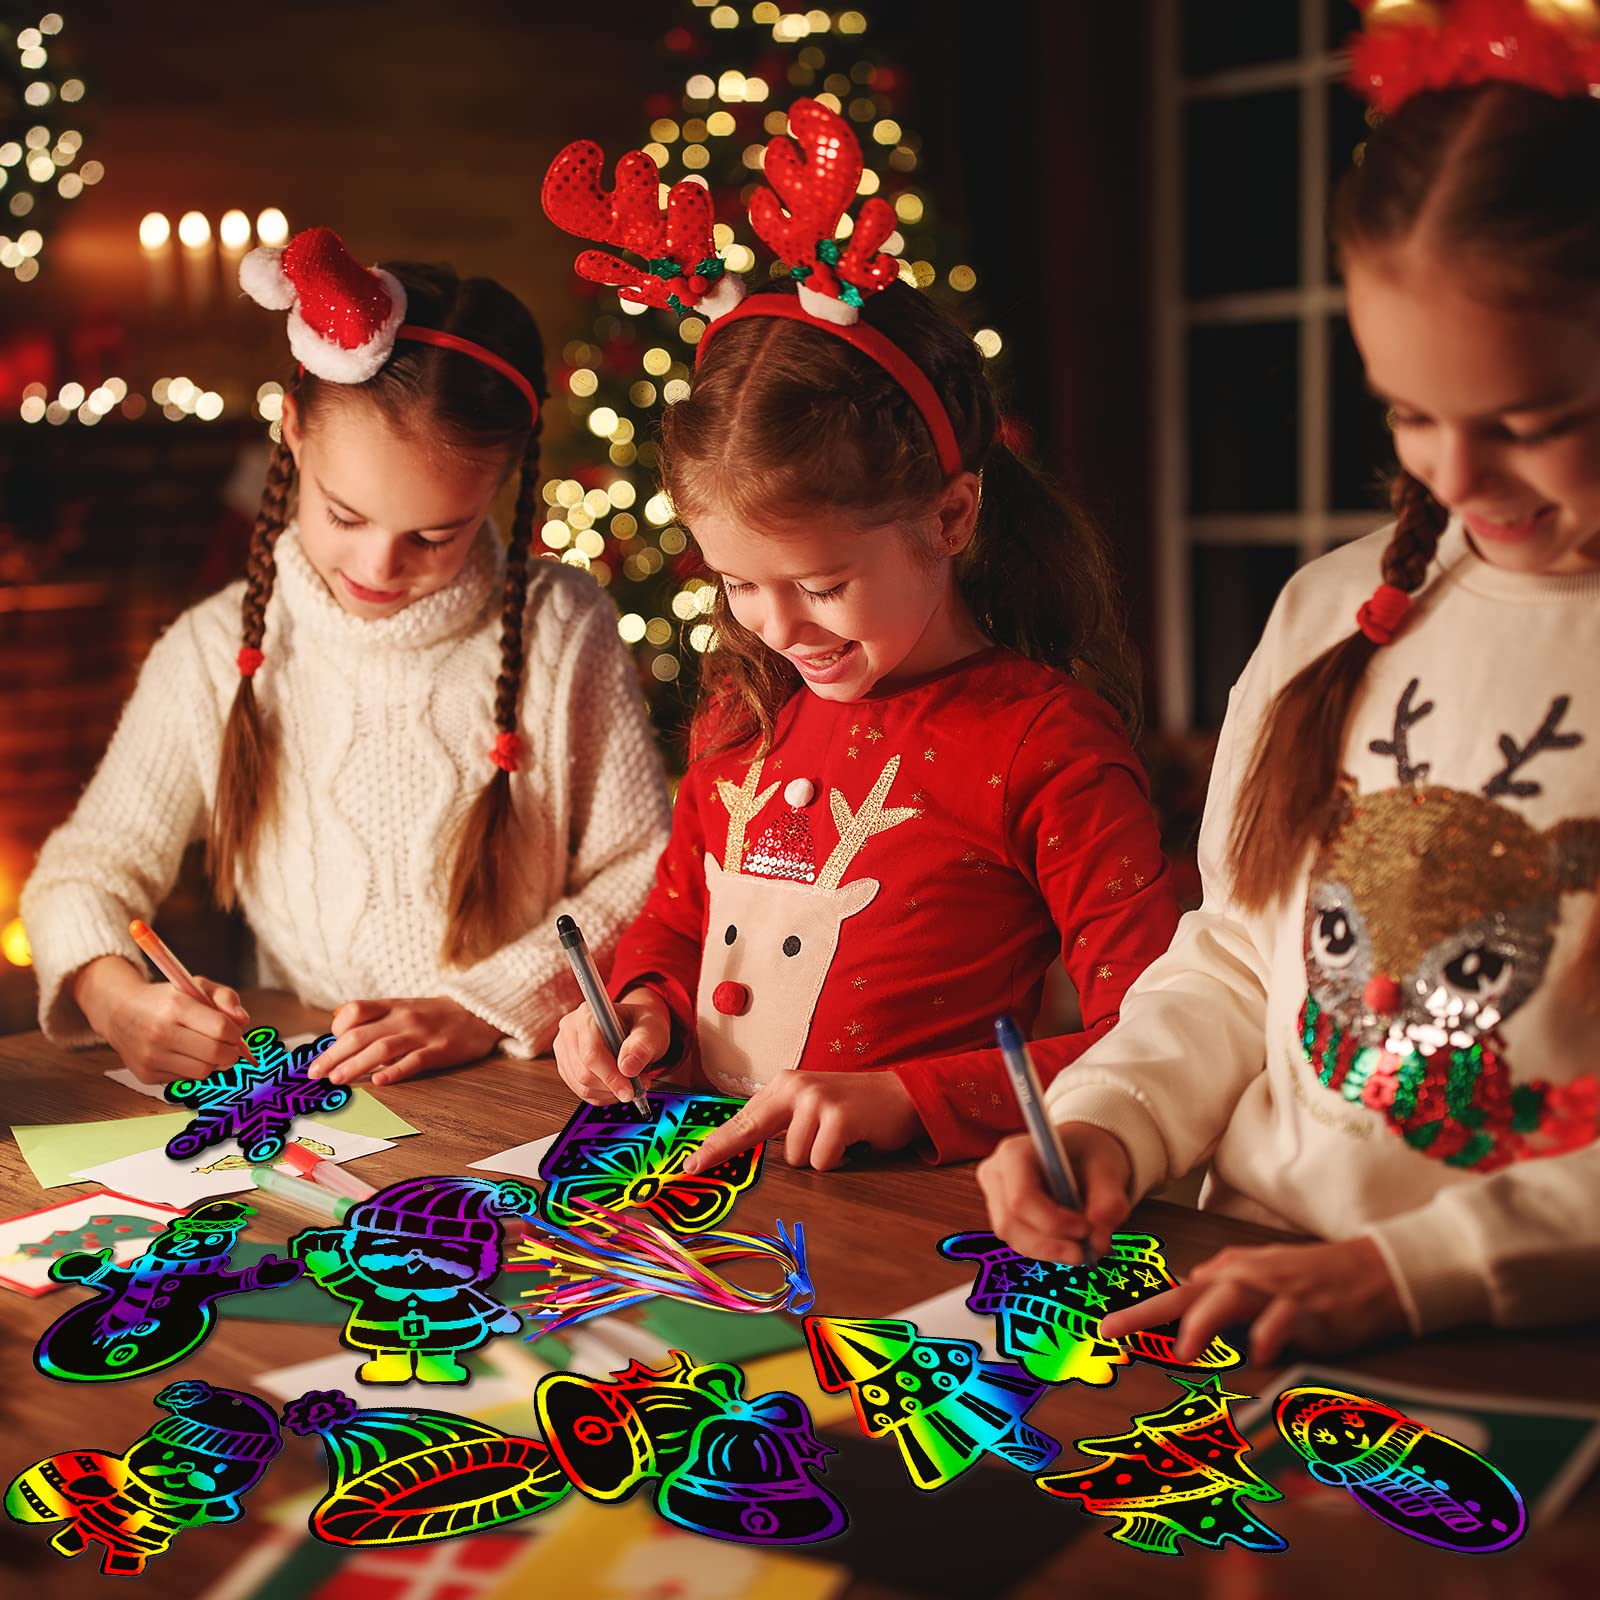 Max Fun Rainbow Color Scratch Christmas Ornaments (48 Counts) - Magic Scratch Off Cards Paper Hanging Art Craft Supplies Educational Toys Kit with 24PCS Drawing Sticks & Cords for Kids Party Favors